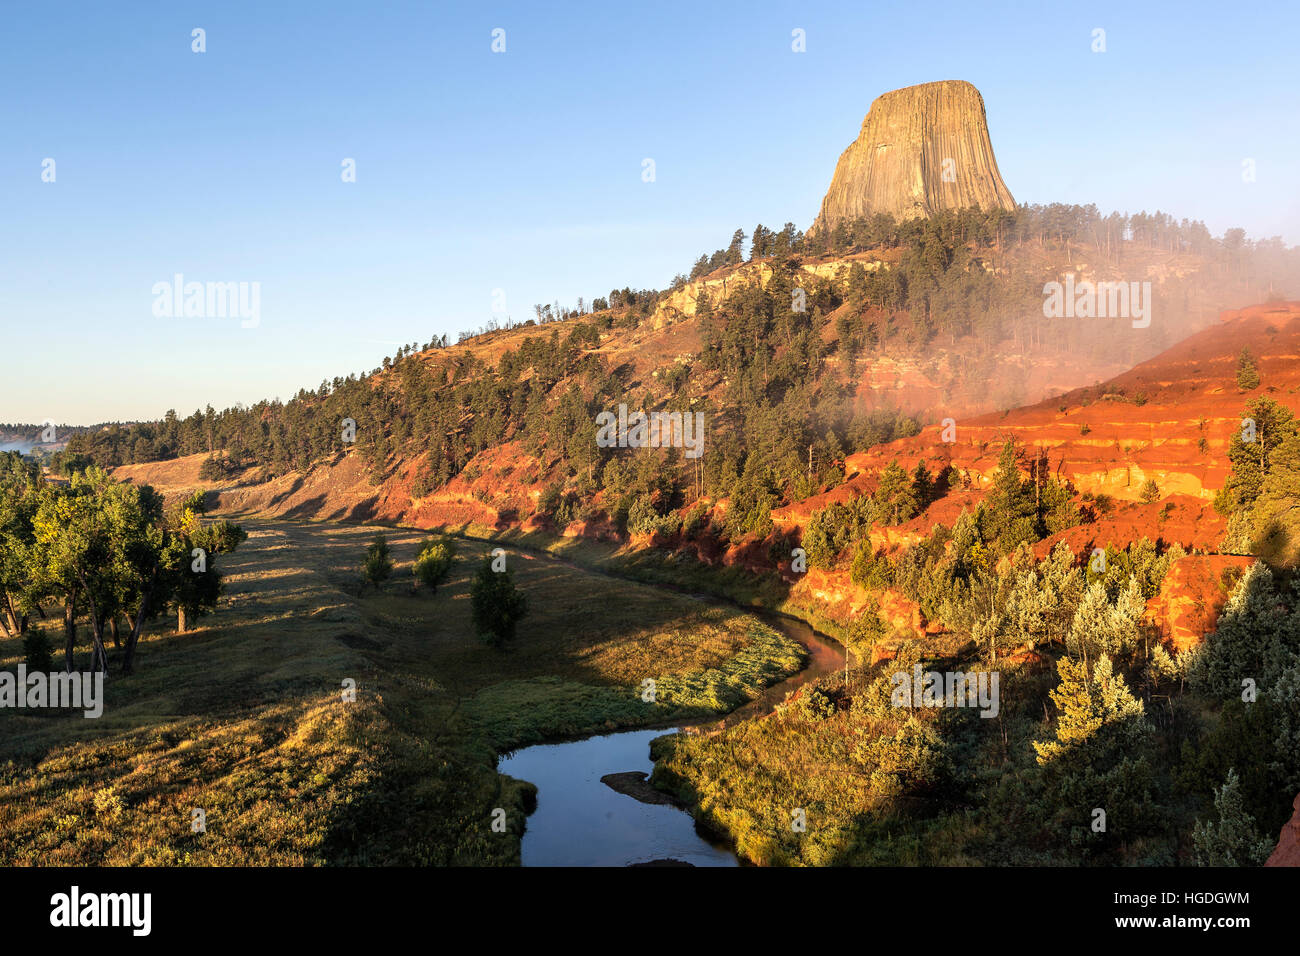 WY02261-00...WYOMING - Devils Tower with the Red Beds and Belle Fourche River in Devils Tower National Monument. Stock Photo